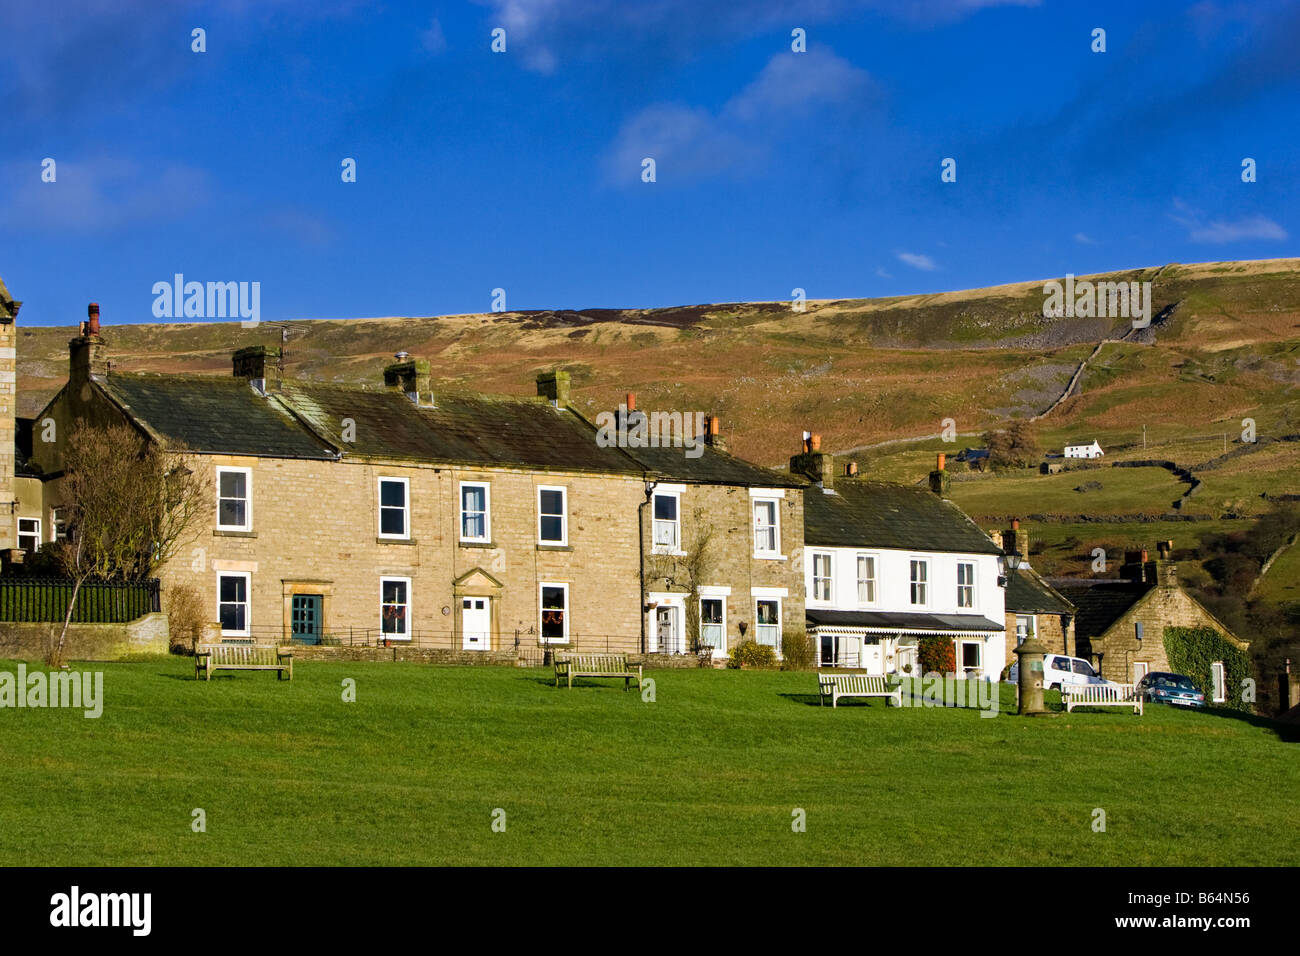 Yorkshire UK - Terraced cottages at Reeth in Swaledale, Yorkshire Dales, England, UK Stock Photo